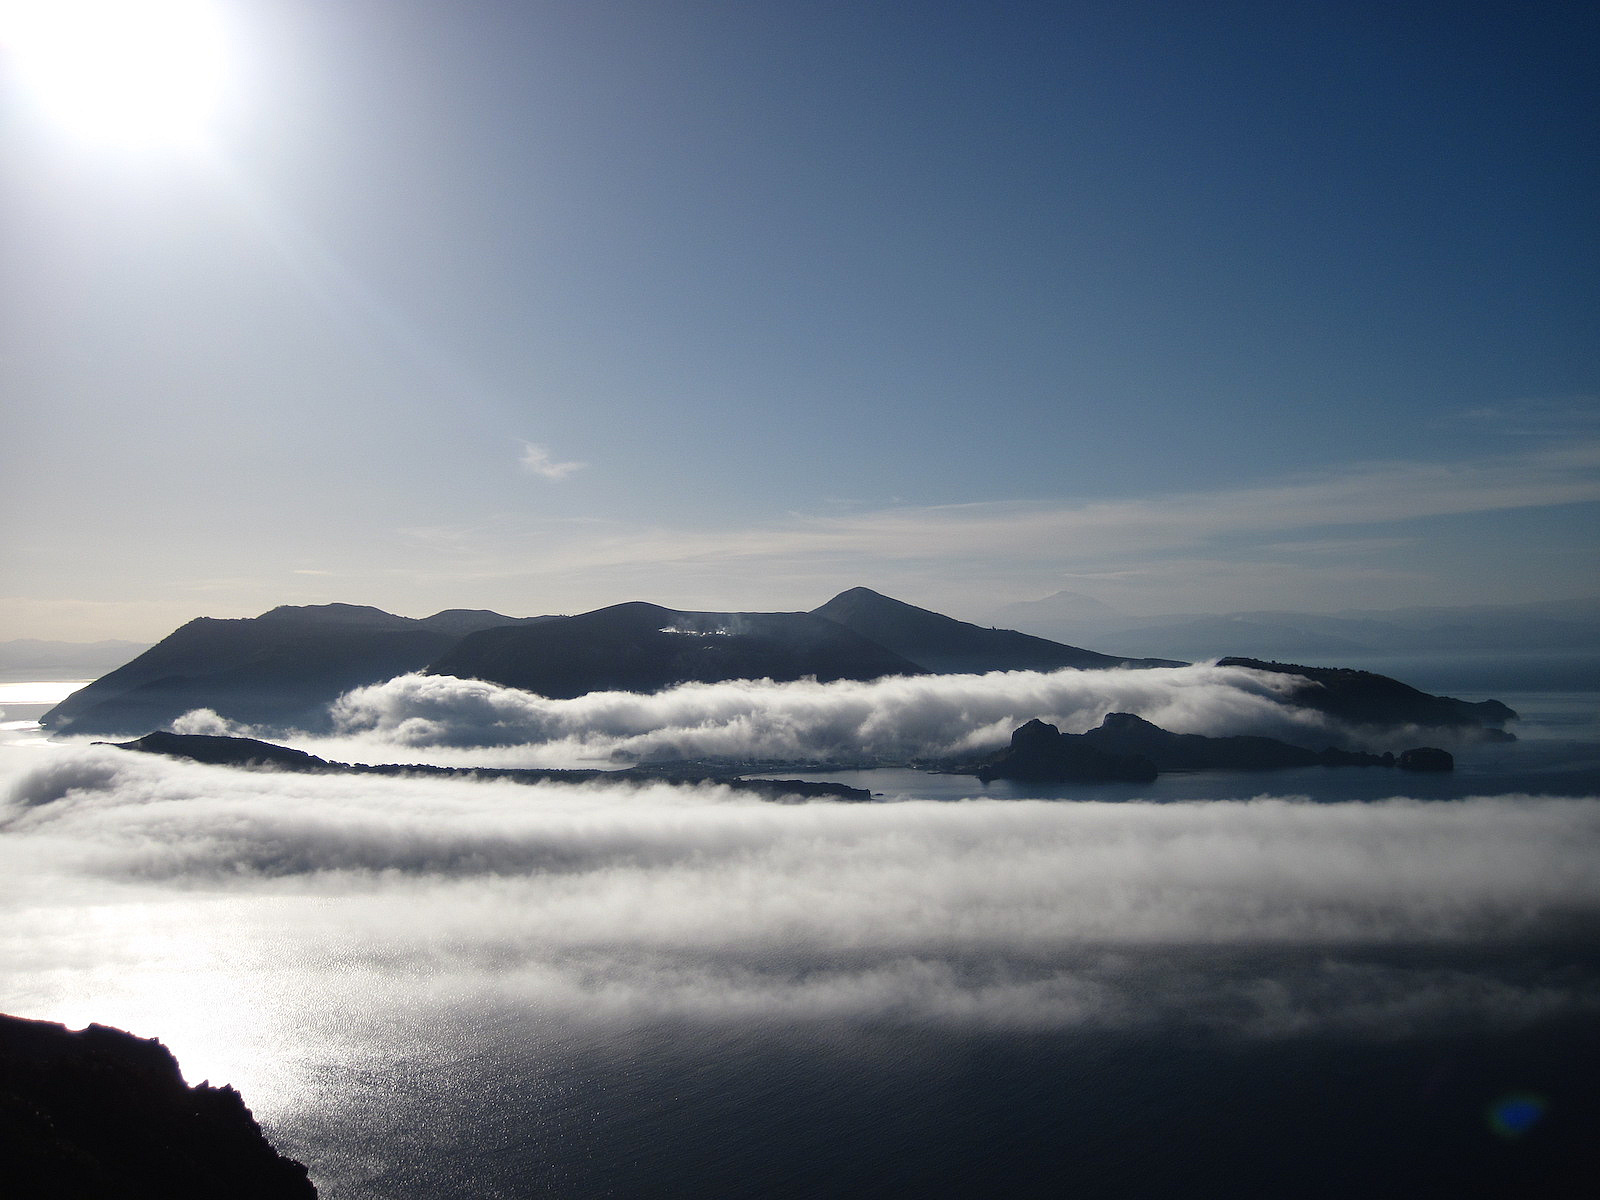 Vulcano island (Aeolian Archipelago, South Mediterranean) wrapped by the fog in wintertime. On the background, Mt. Etna. - Pictures